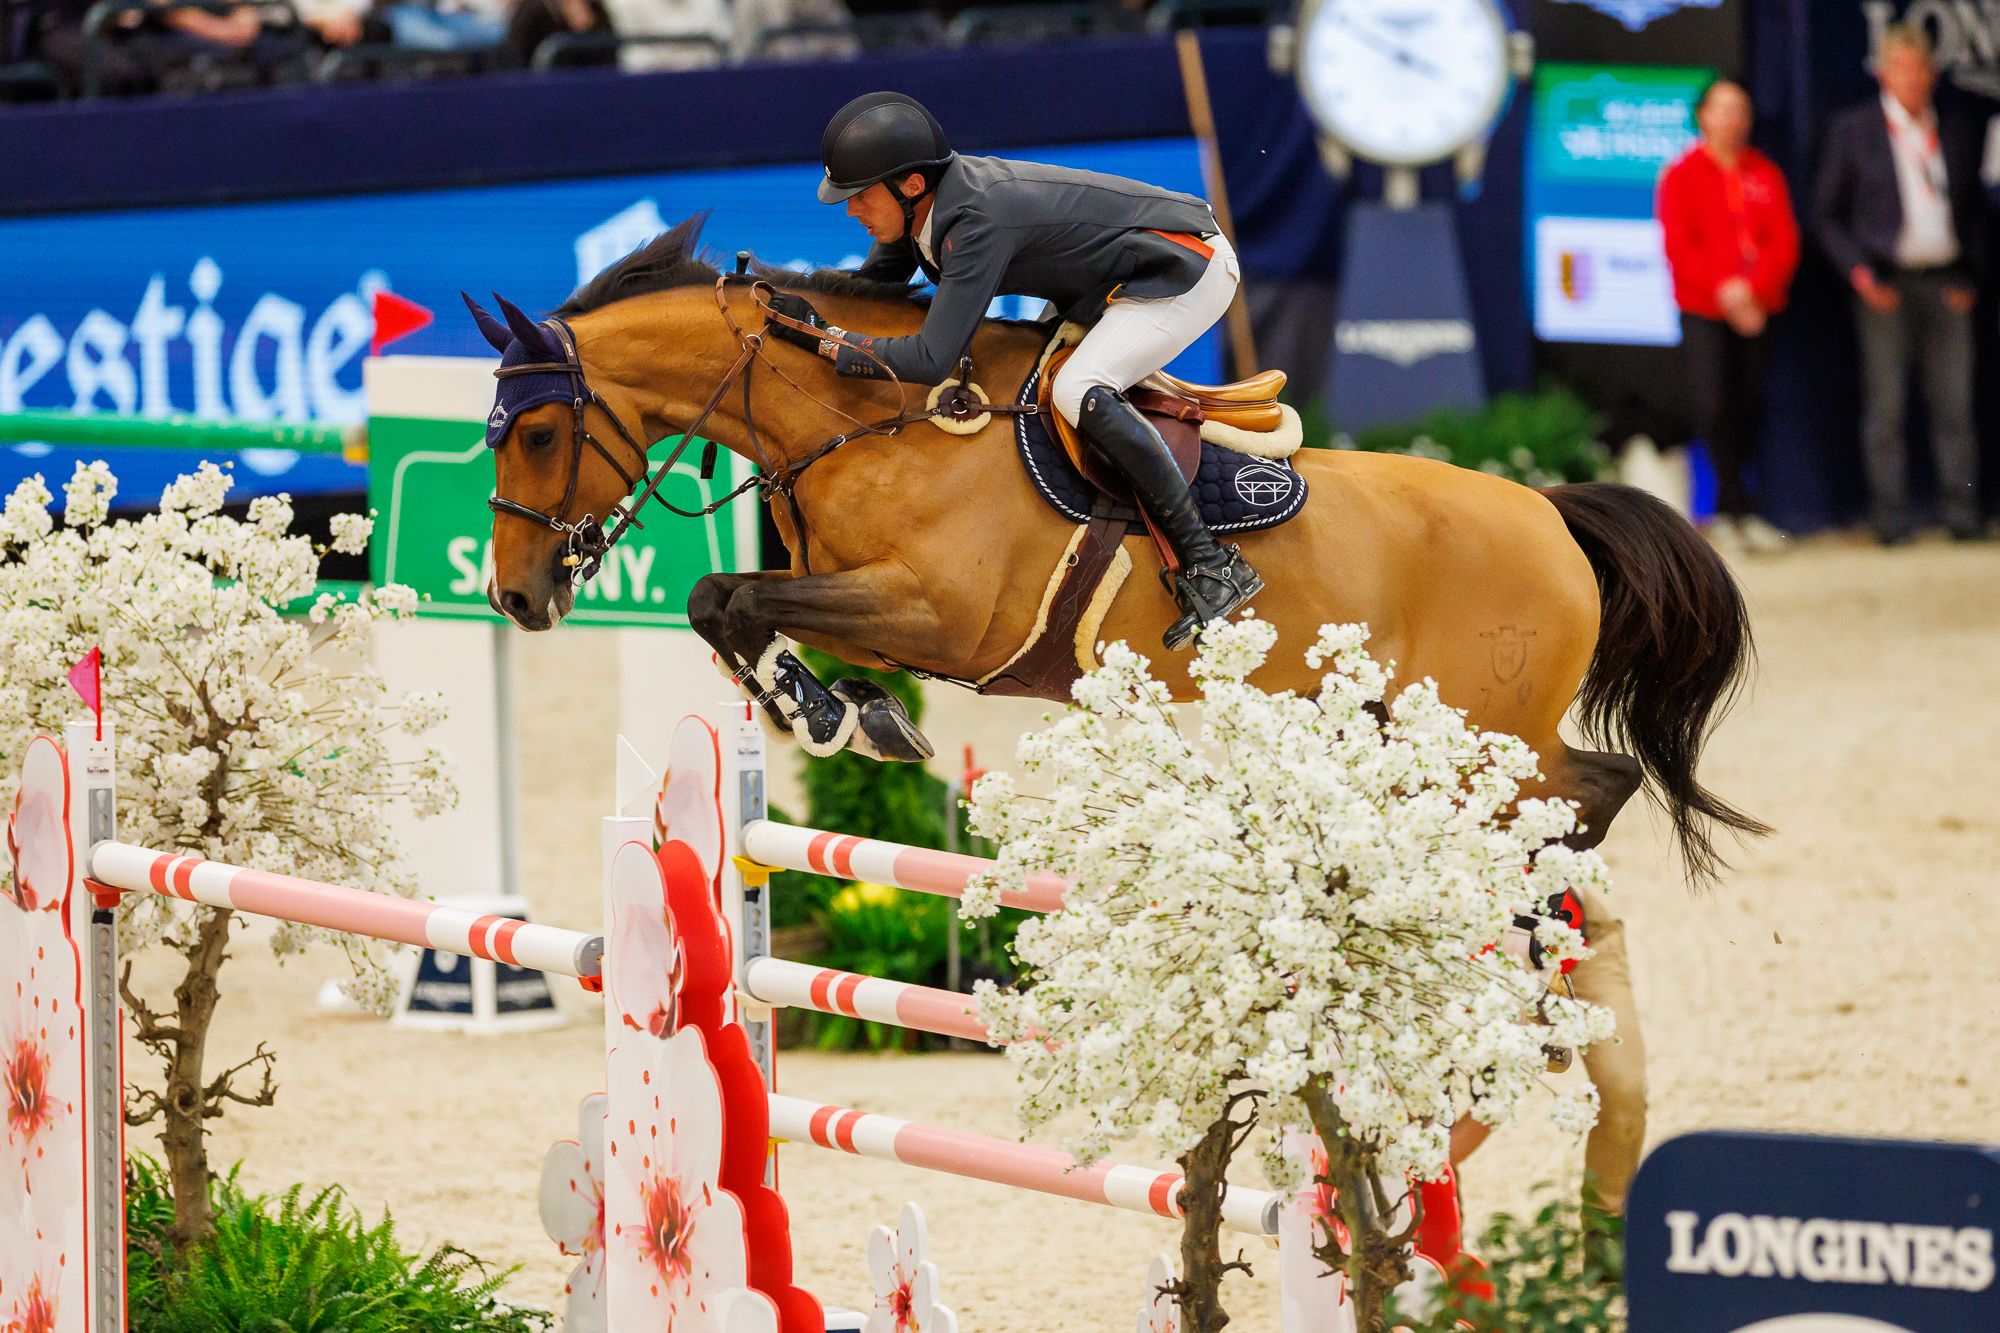 Harrie Smolders' Monaco is number one jumping horse in the world